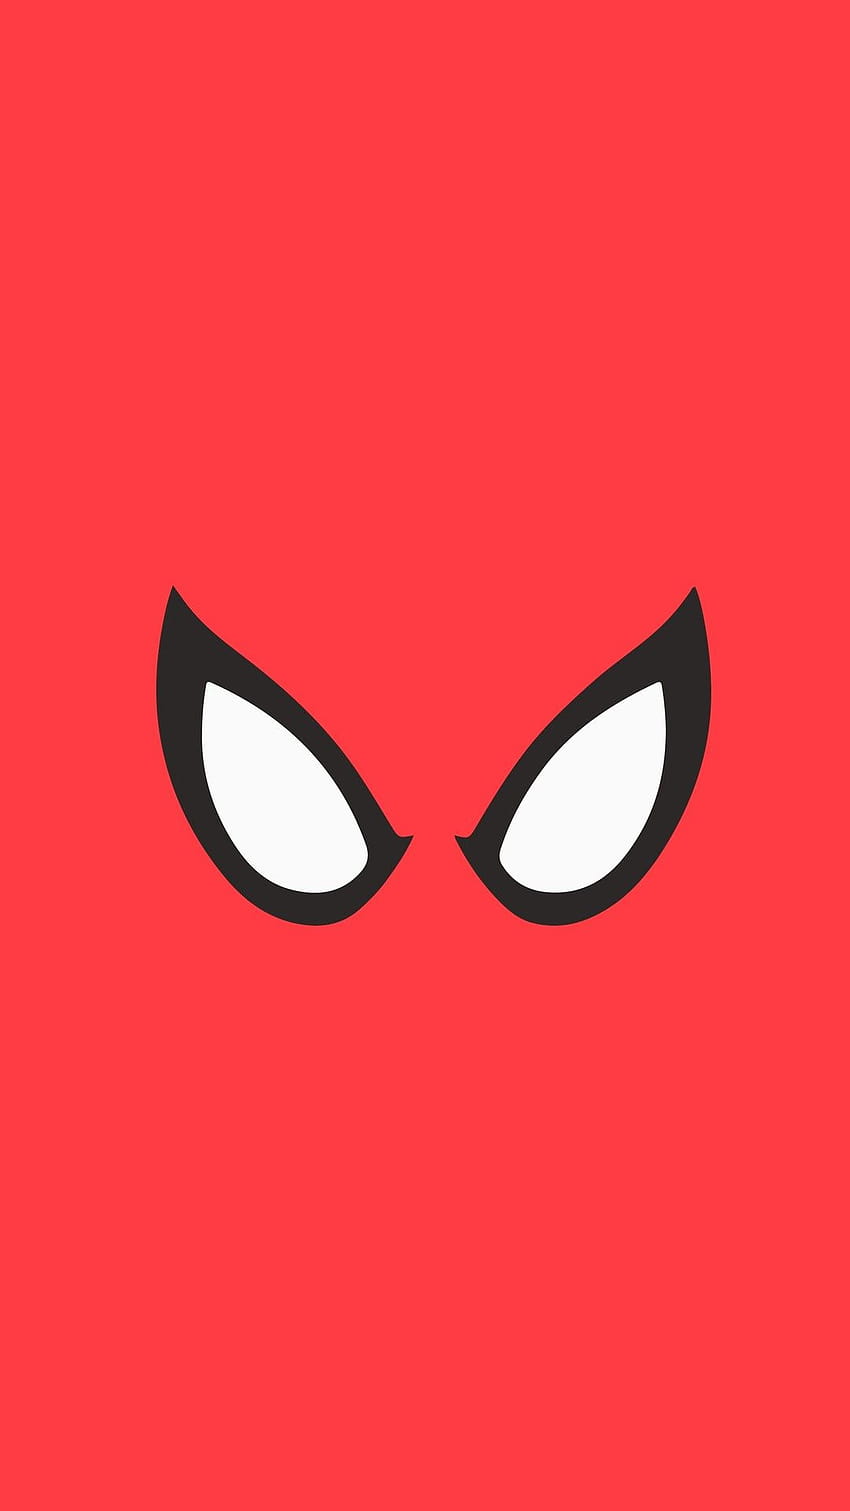 An Incredible Compilation of Over 999 Spiderman Face Images in Stunning ...